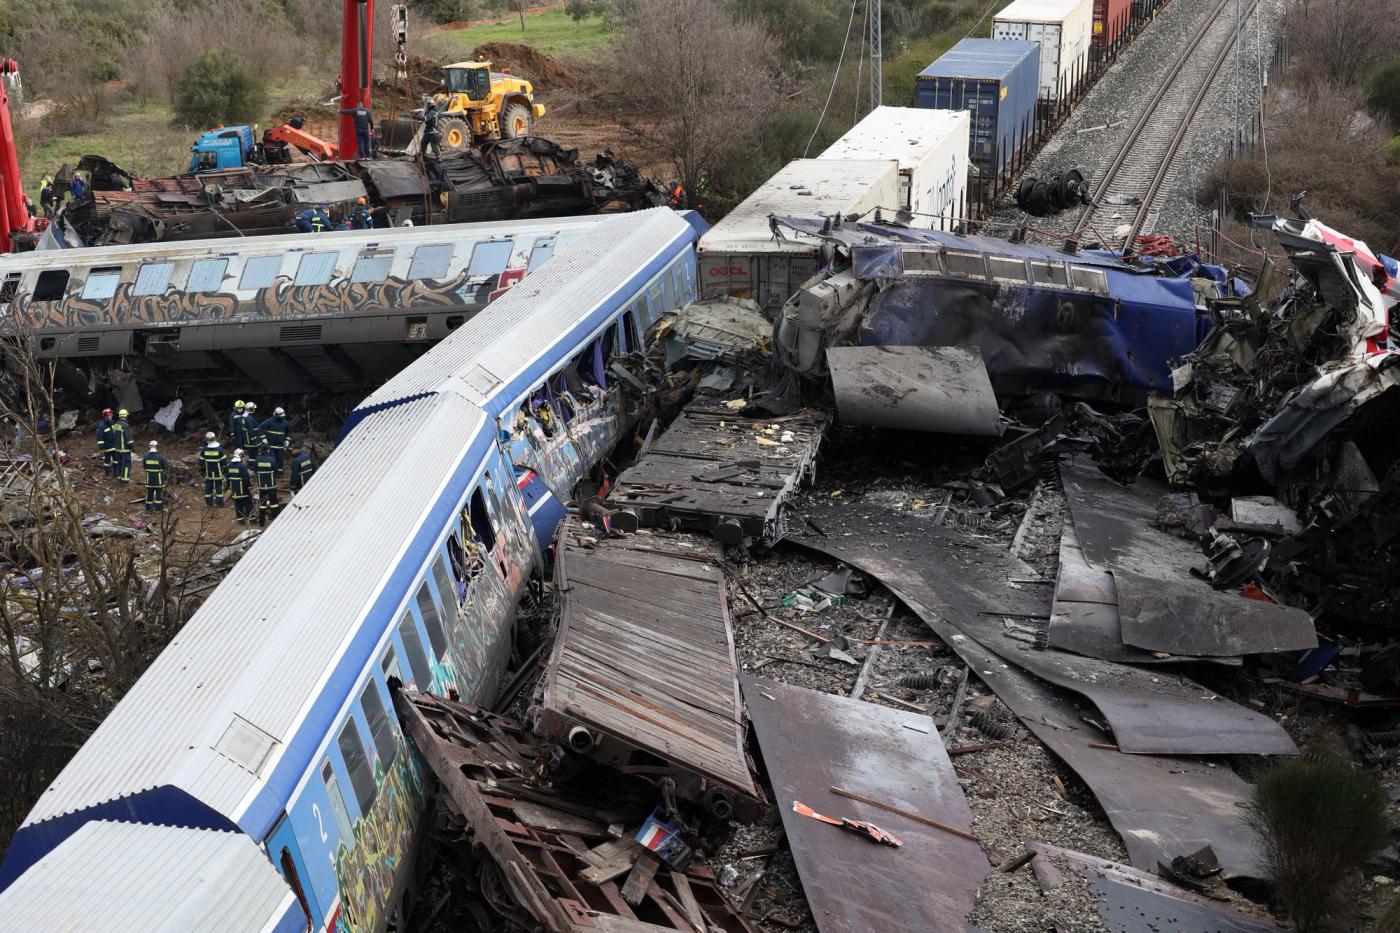 Destroyed train carriages are seen at the site of a crash, where two trains collided, near the city of Larissa, Greece, March 1, 2023. REUTERS/Alexandros Avramidis